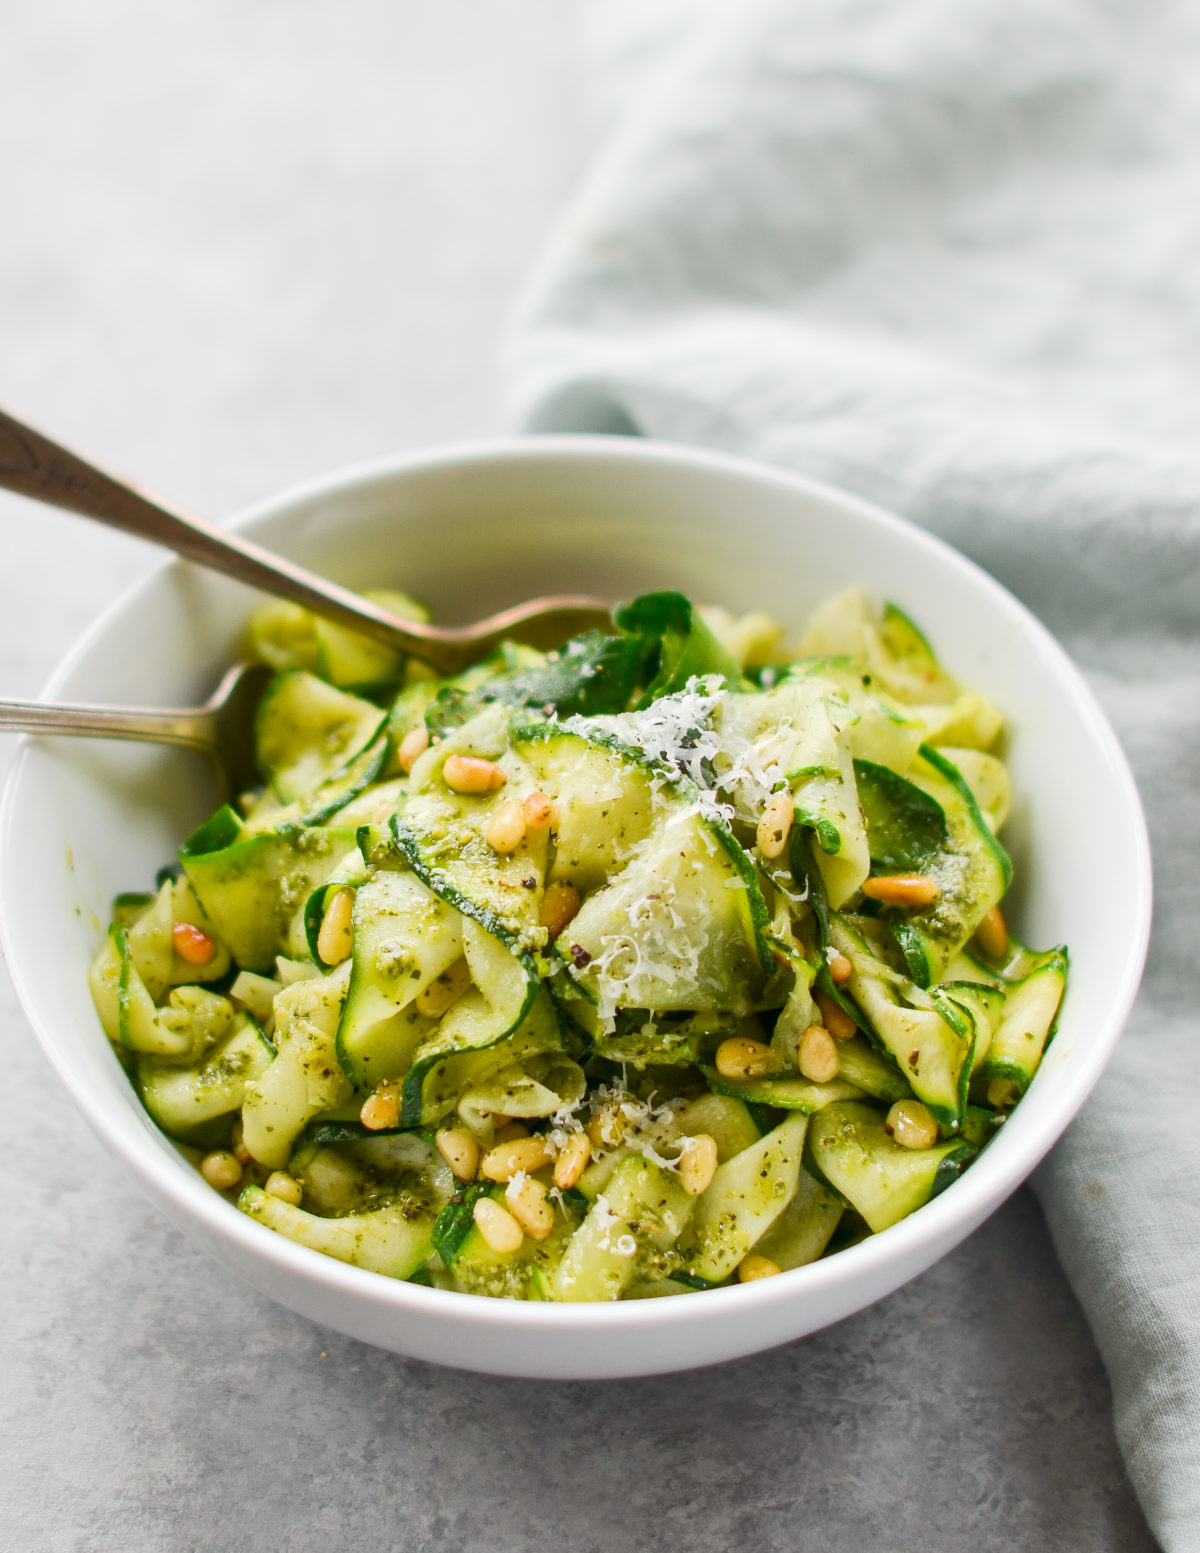 Zucchini "Noodles" with Pesto & Pine Nuts